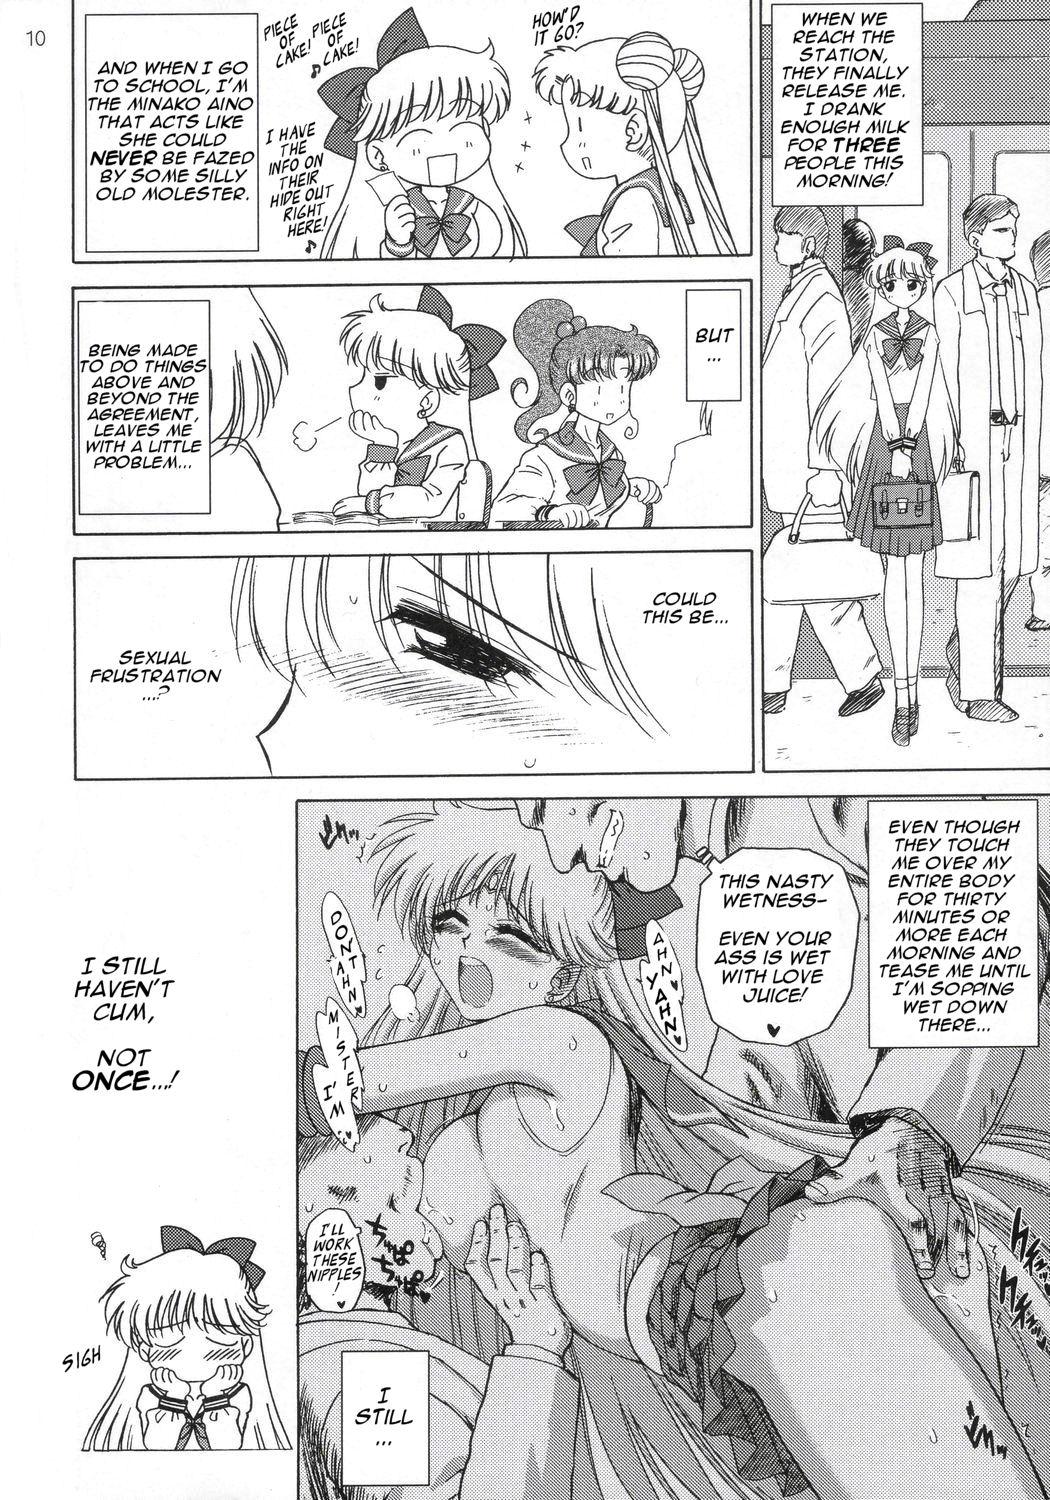 Amature Porn Super Fly - Sailor moon Doctor - Page 9